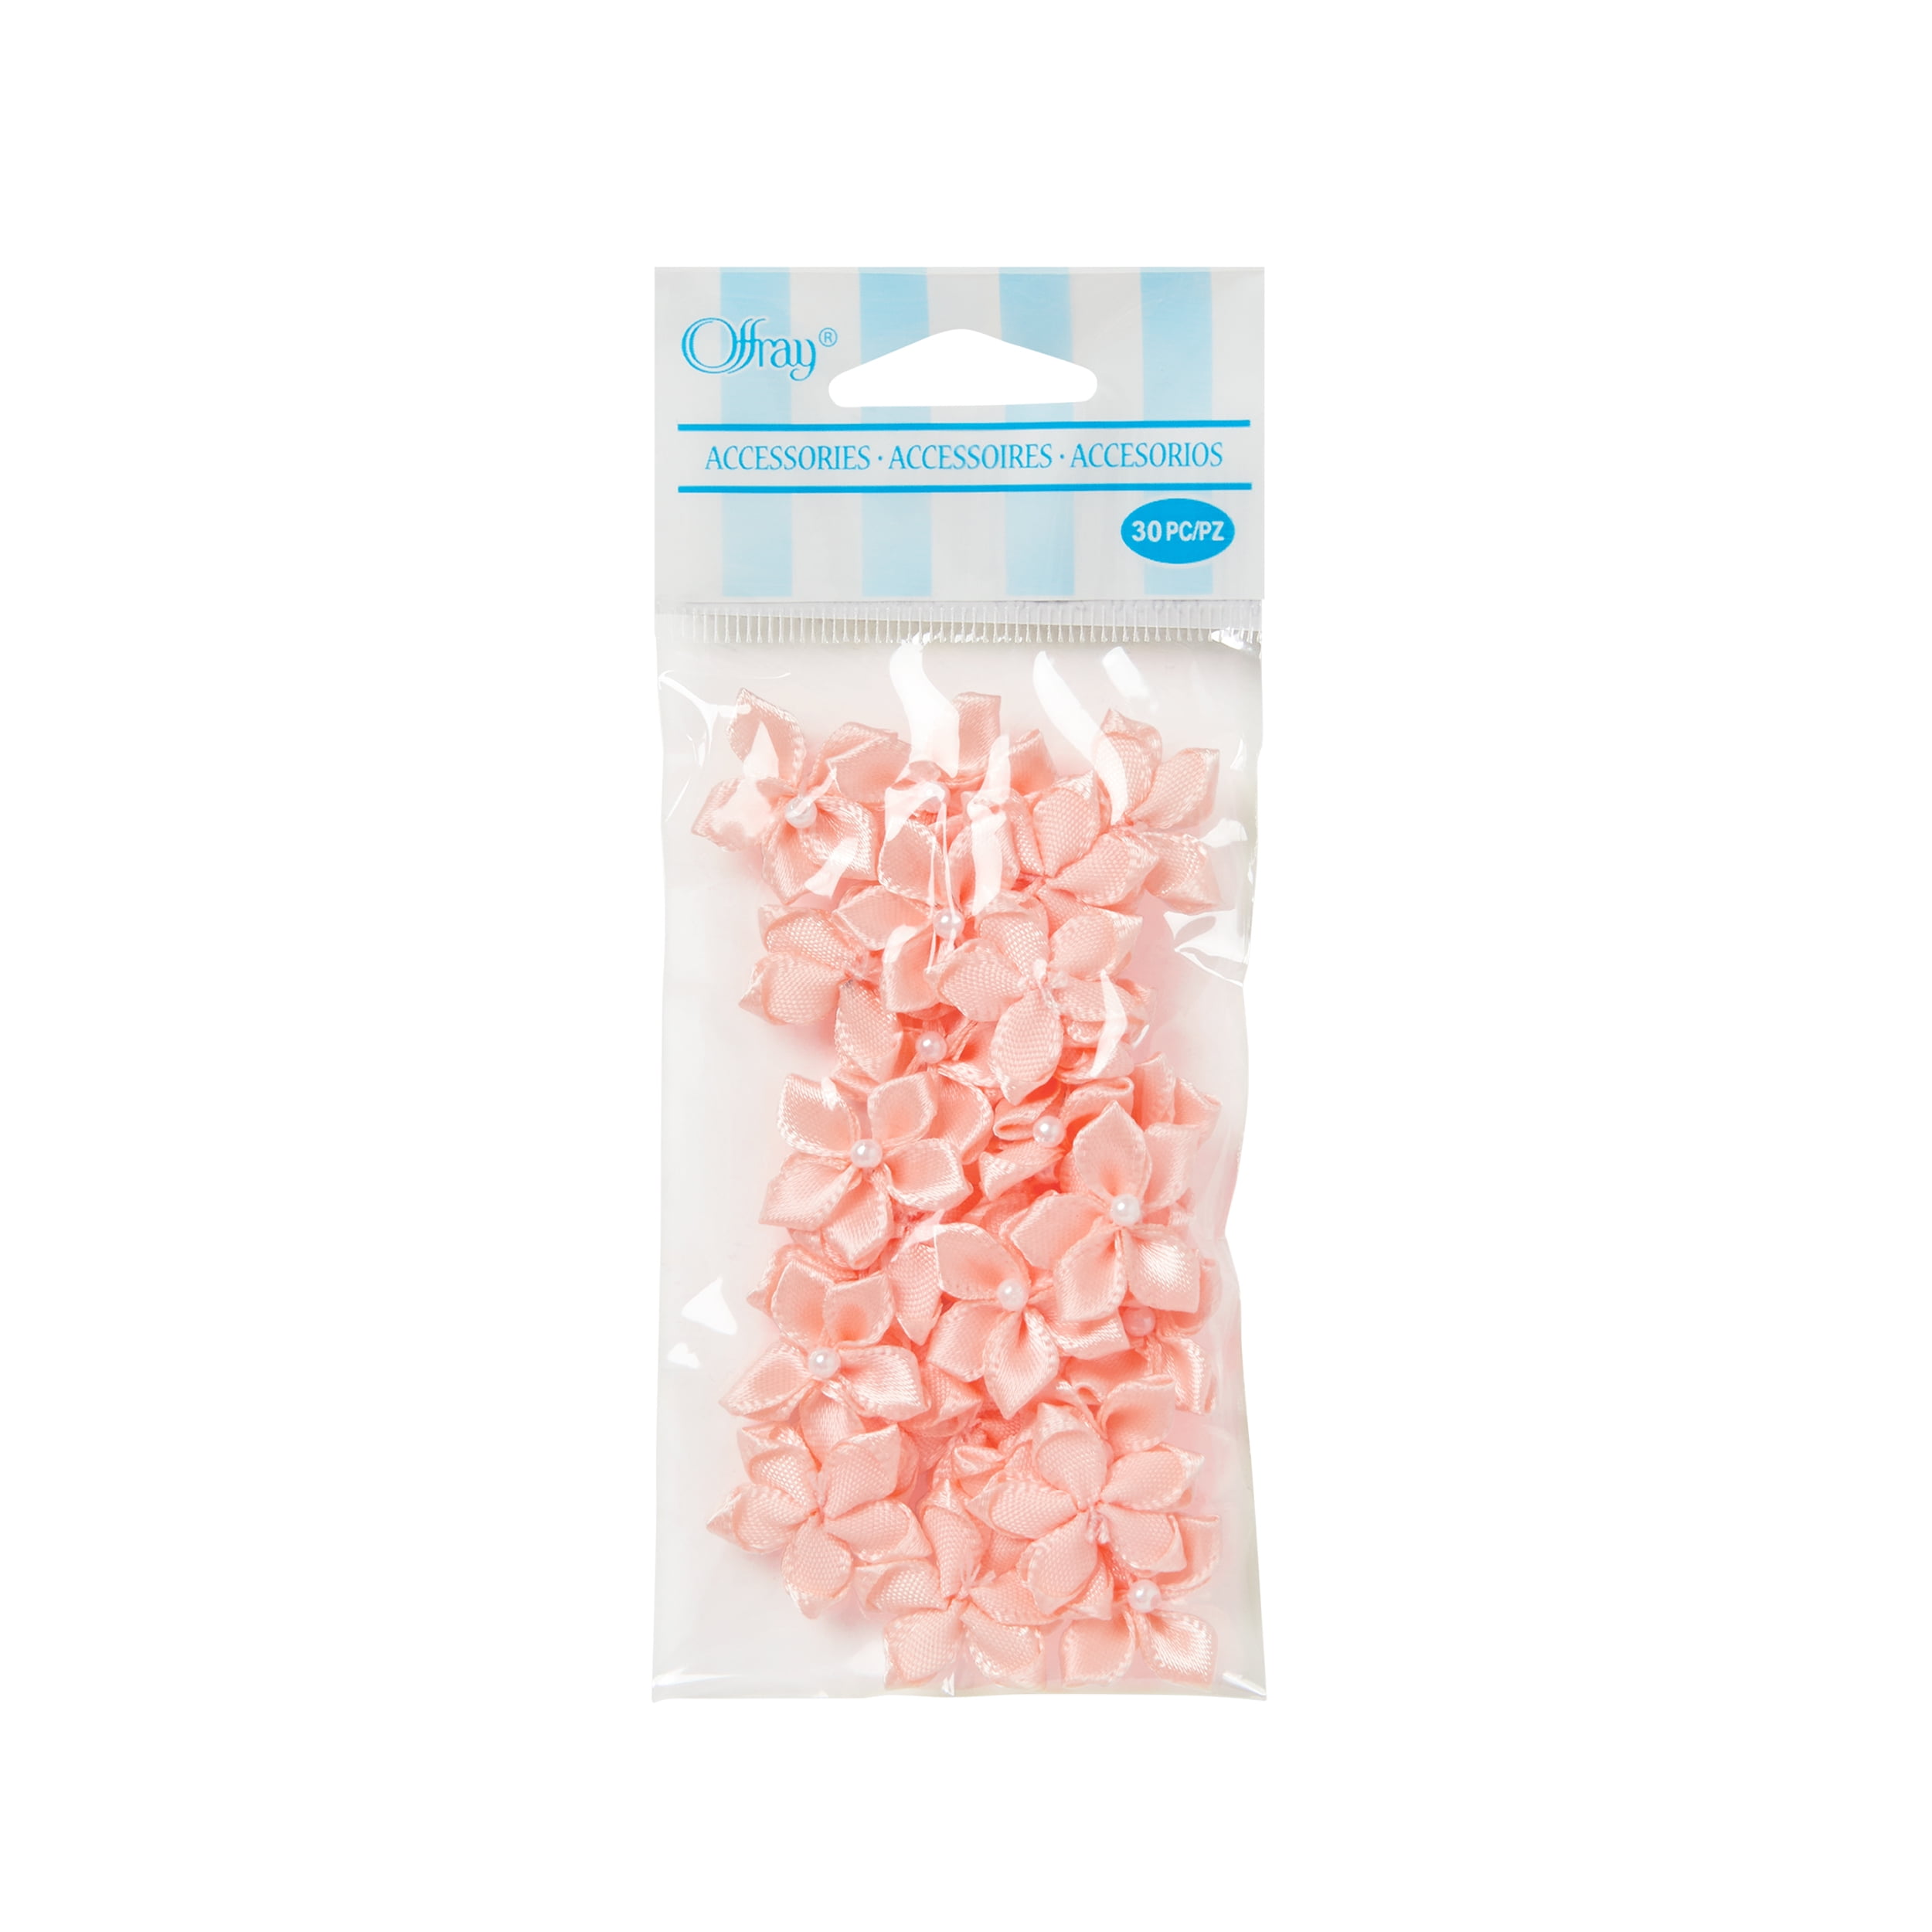 Offray Accessories, Lt Pink 3/4 inch Value Pack 5 Petal Flower with Pearl Accessory for Wedding, Hair Clips, and Scrapbooking, 30 count, 1 Package